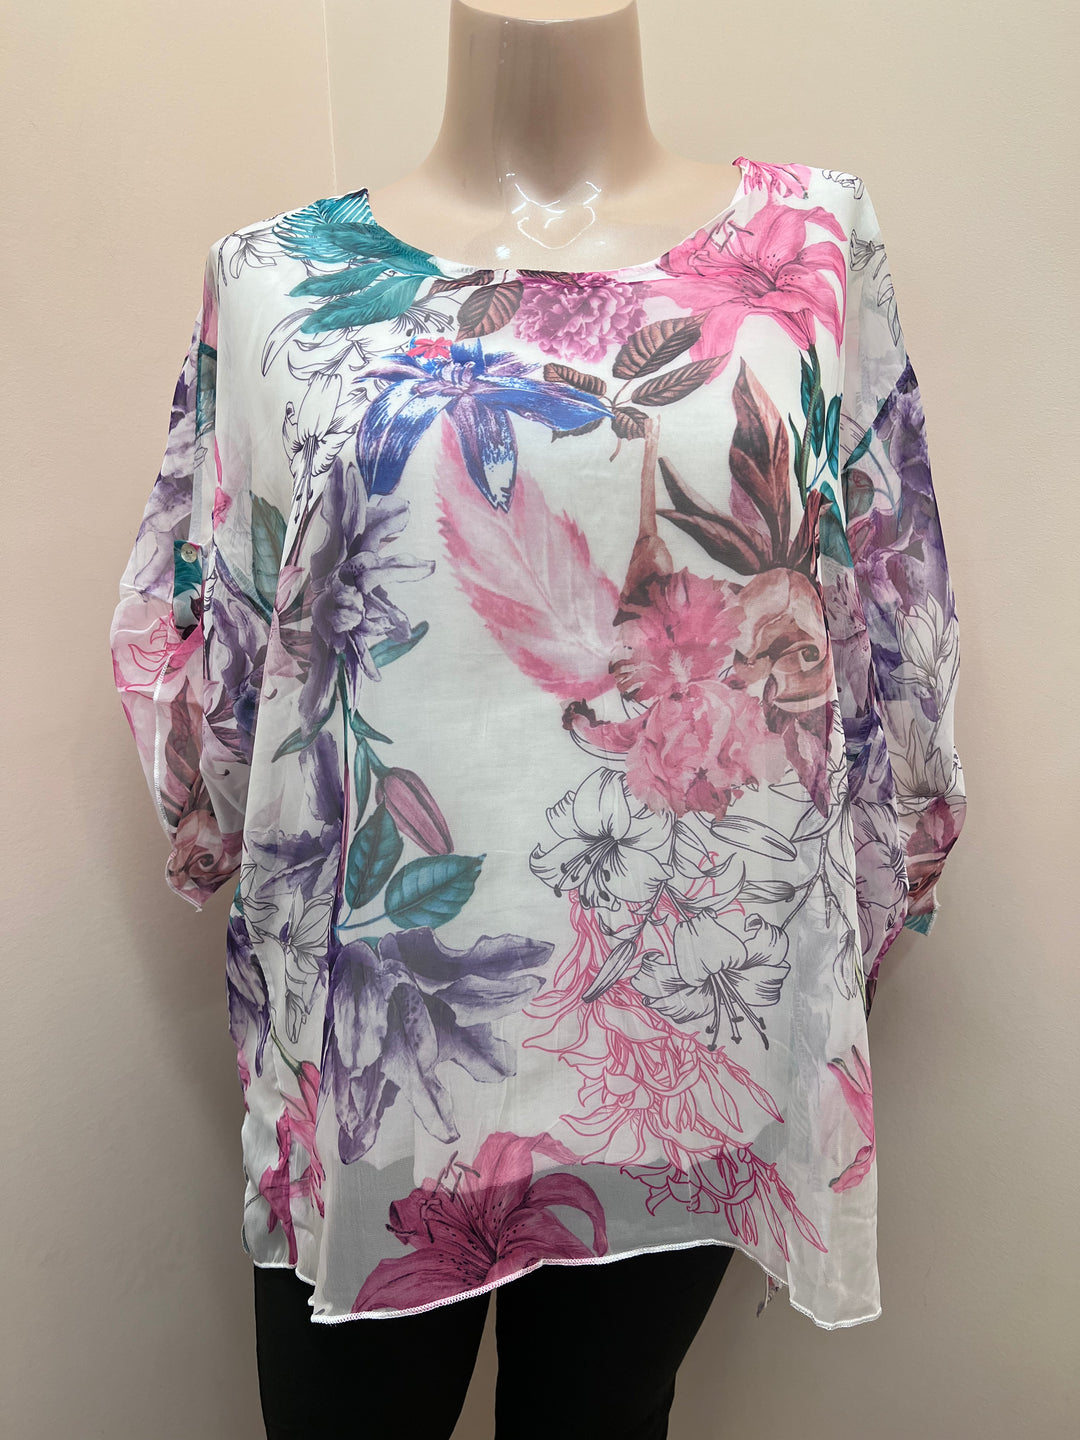 Floral Chiffon Overlay Blouse